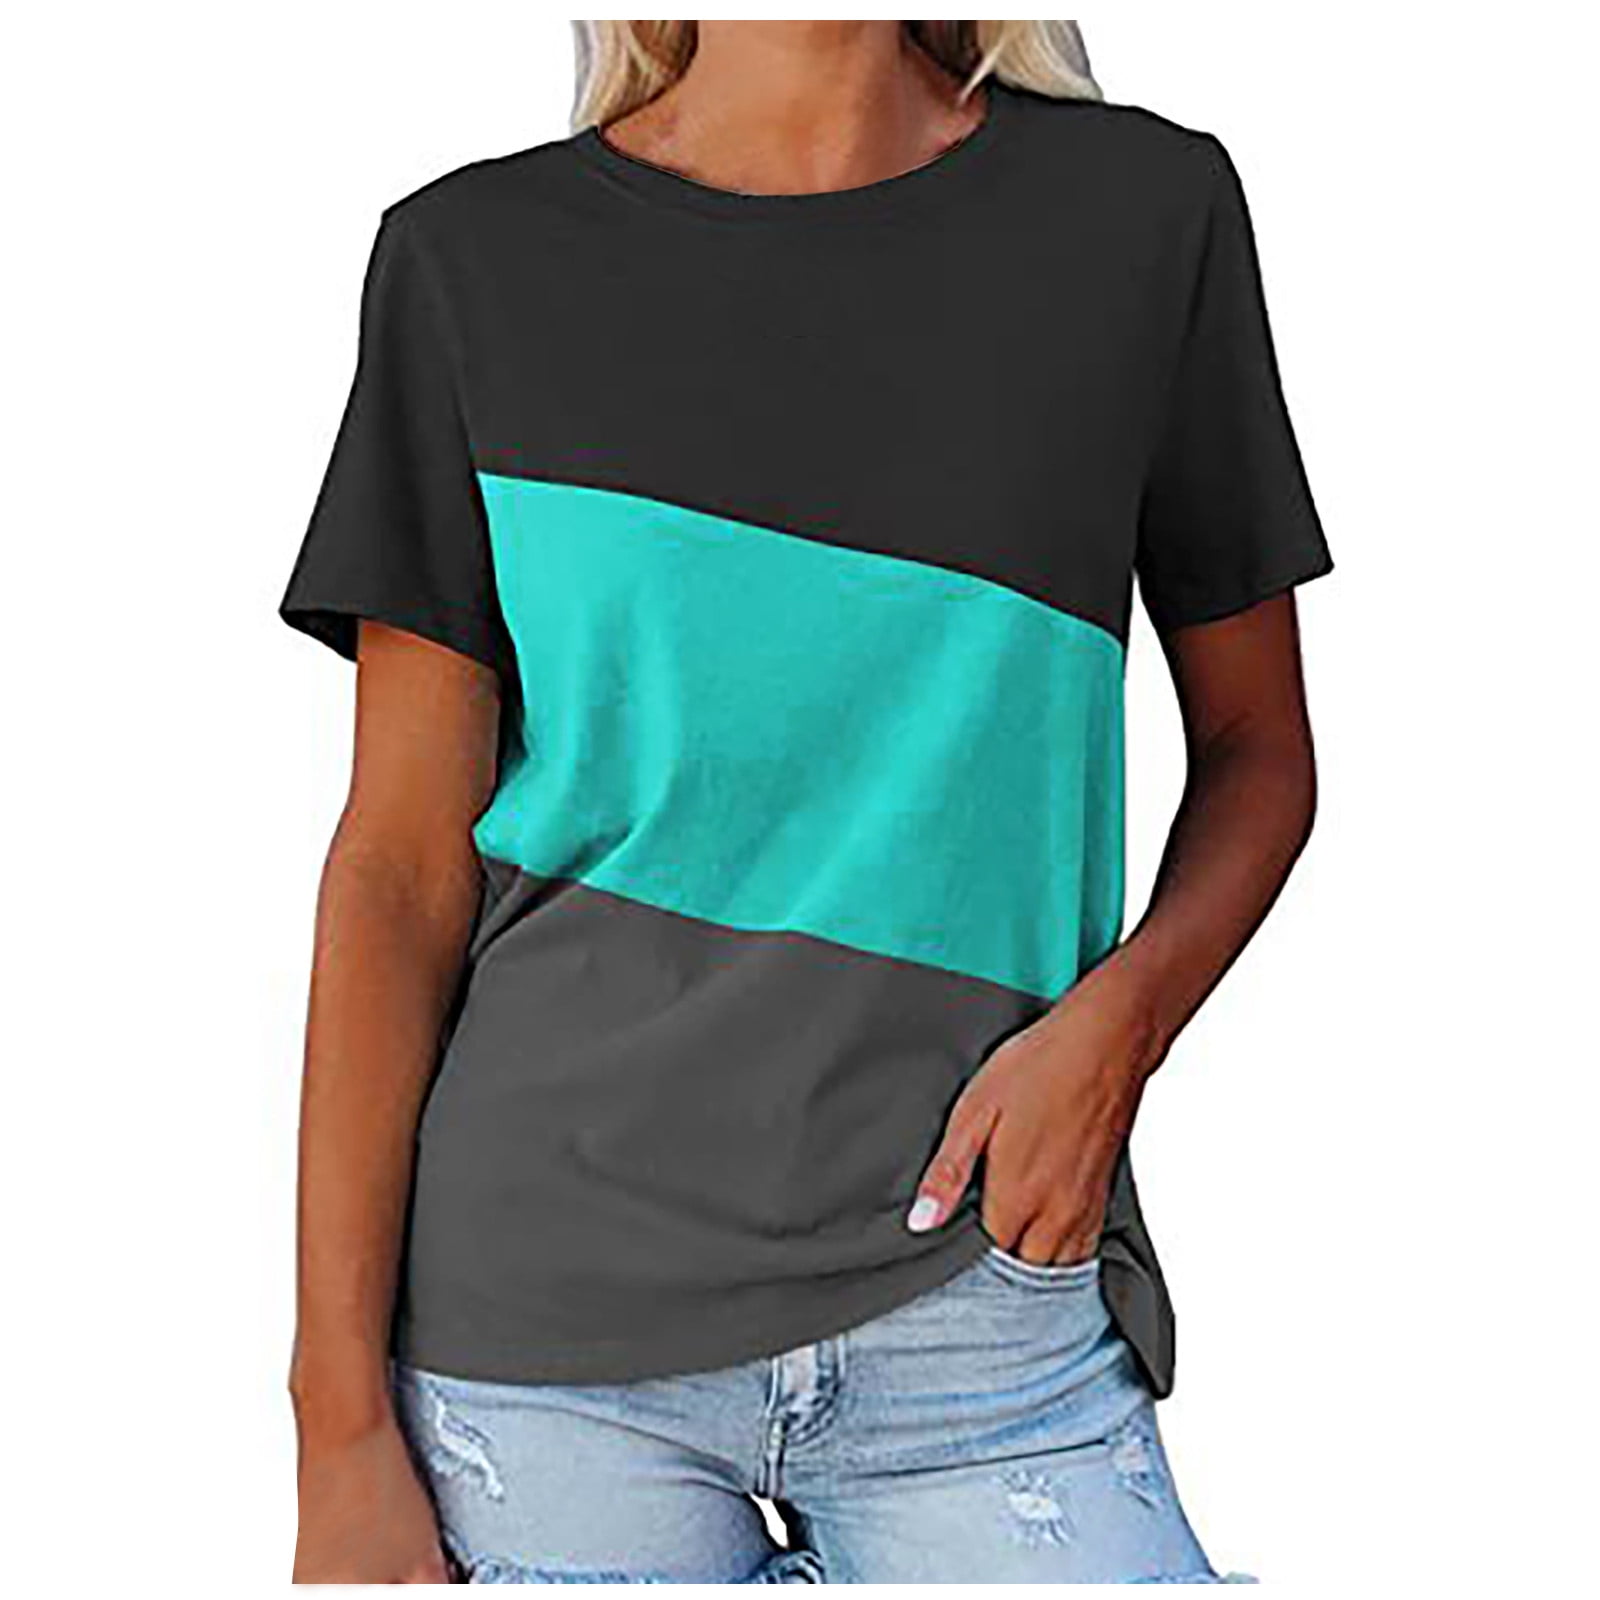 Summer Shirts for Women I am Not a Monring Person Cute Funny Tee Tops Tank Tops Casual Loose Fashion Tunic T-Shirt Blouses 